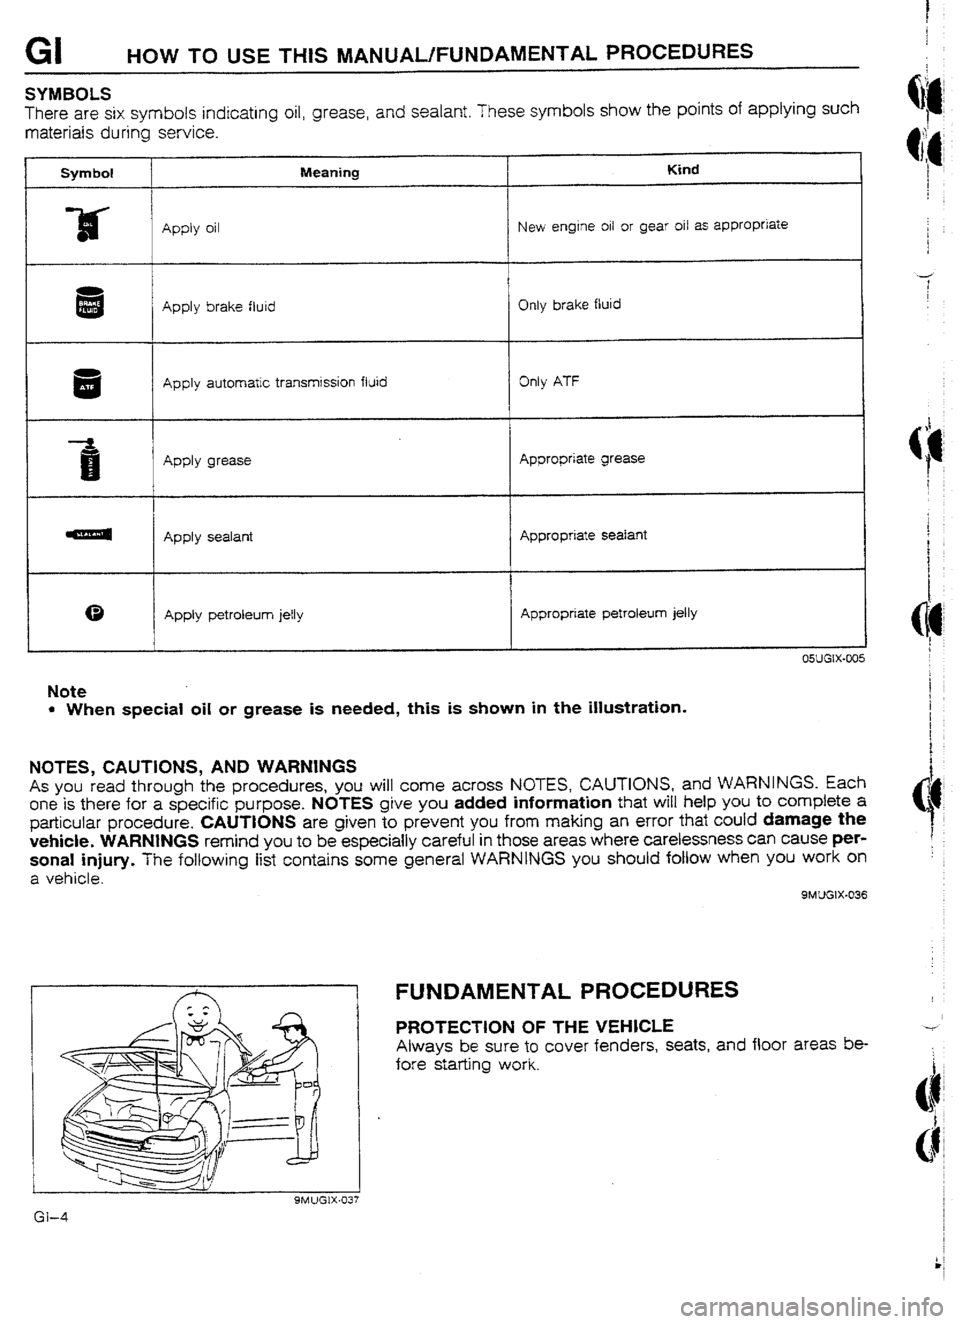 MAZDA 232 1990  Workshop Manual Suplement GI HOW TO USE -MS lVlANUAL/FUNDAMENTAL PROCEDURES 
SYMBOLS 
There are six symbols indicating oil, grease, and sealant. 
These symbols show the points of applying such 
materials during service. 
Symbo